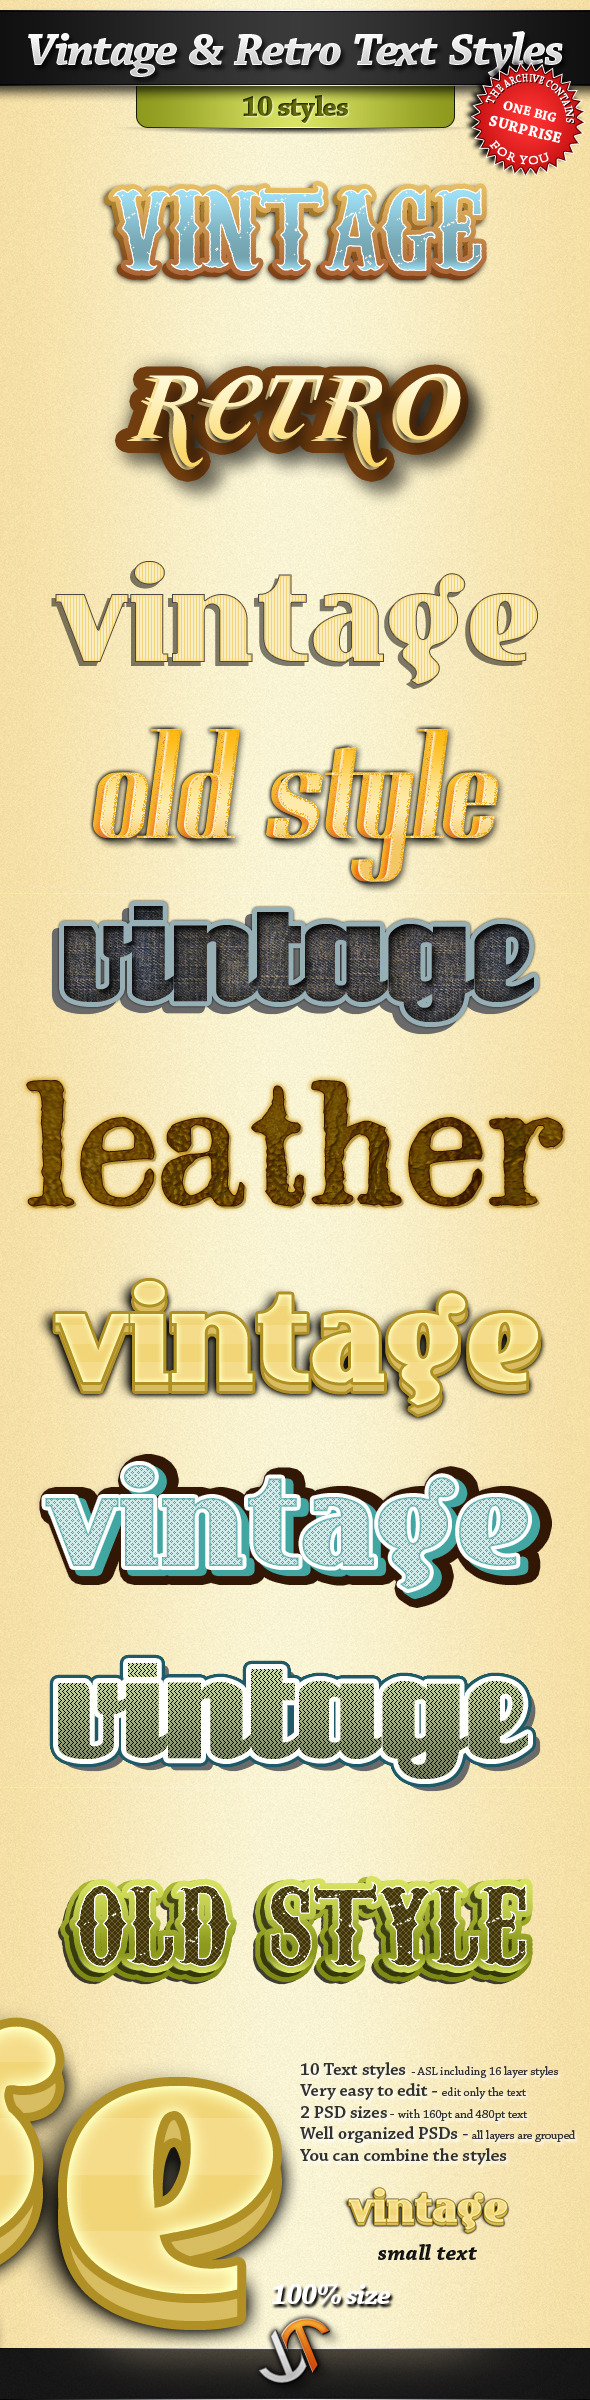 Vintage and Retro Text Styles